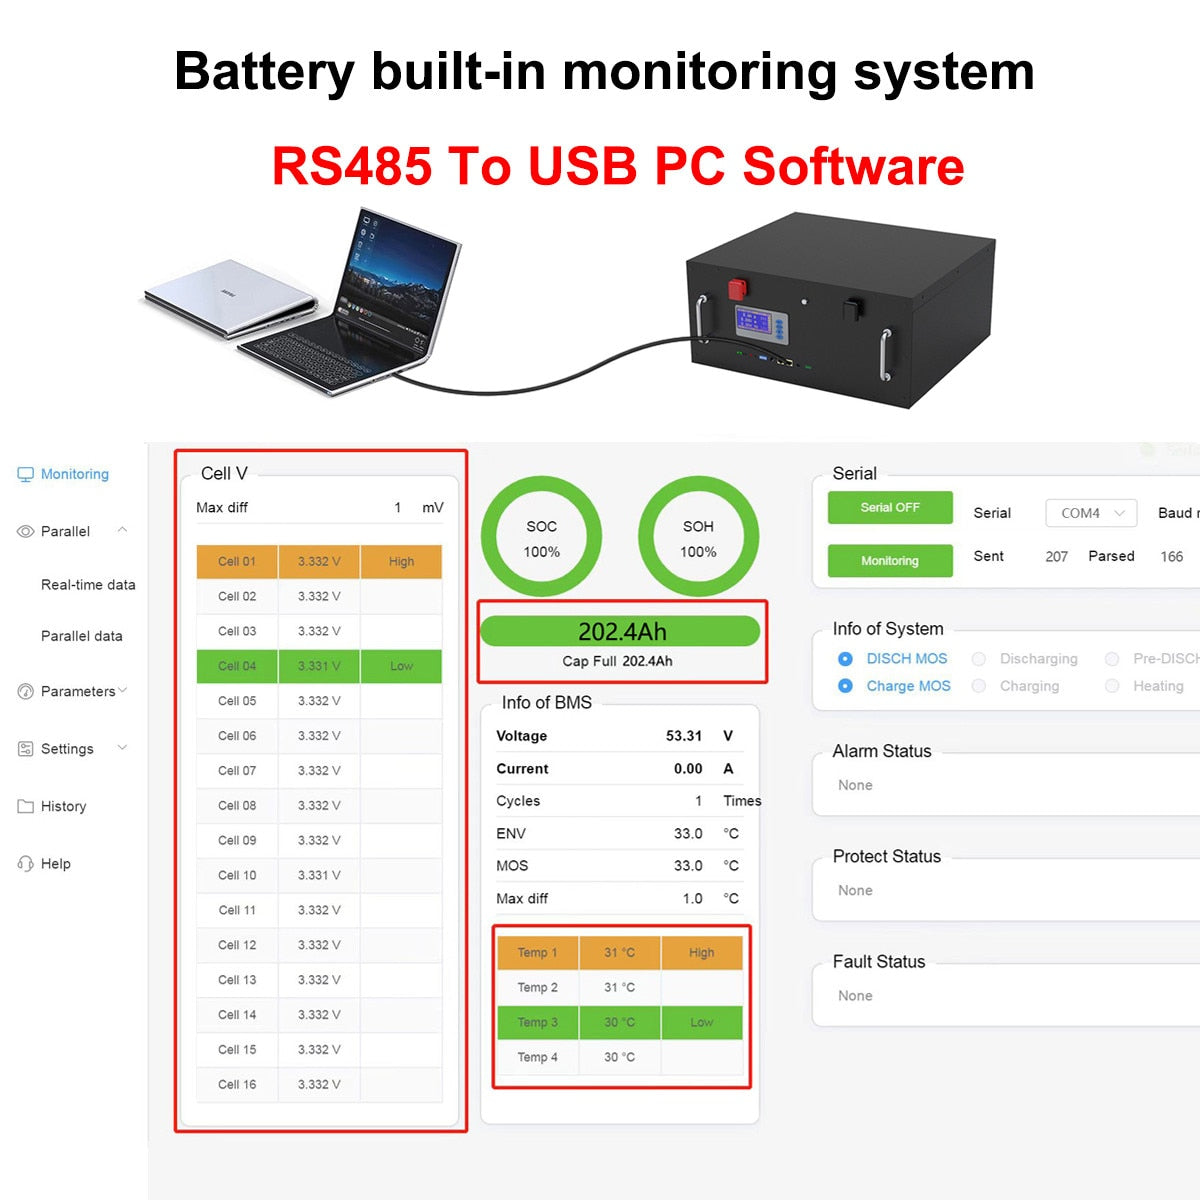 Battery built-in monitoring system RS485 To USB PC Software